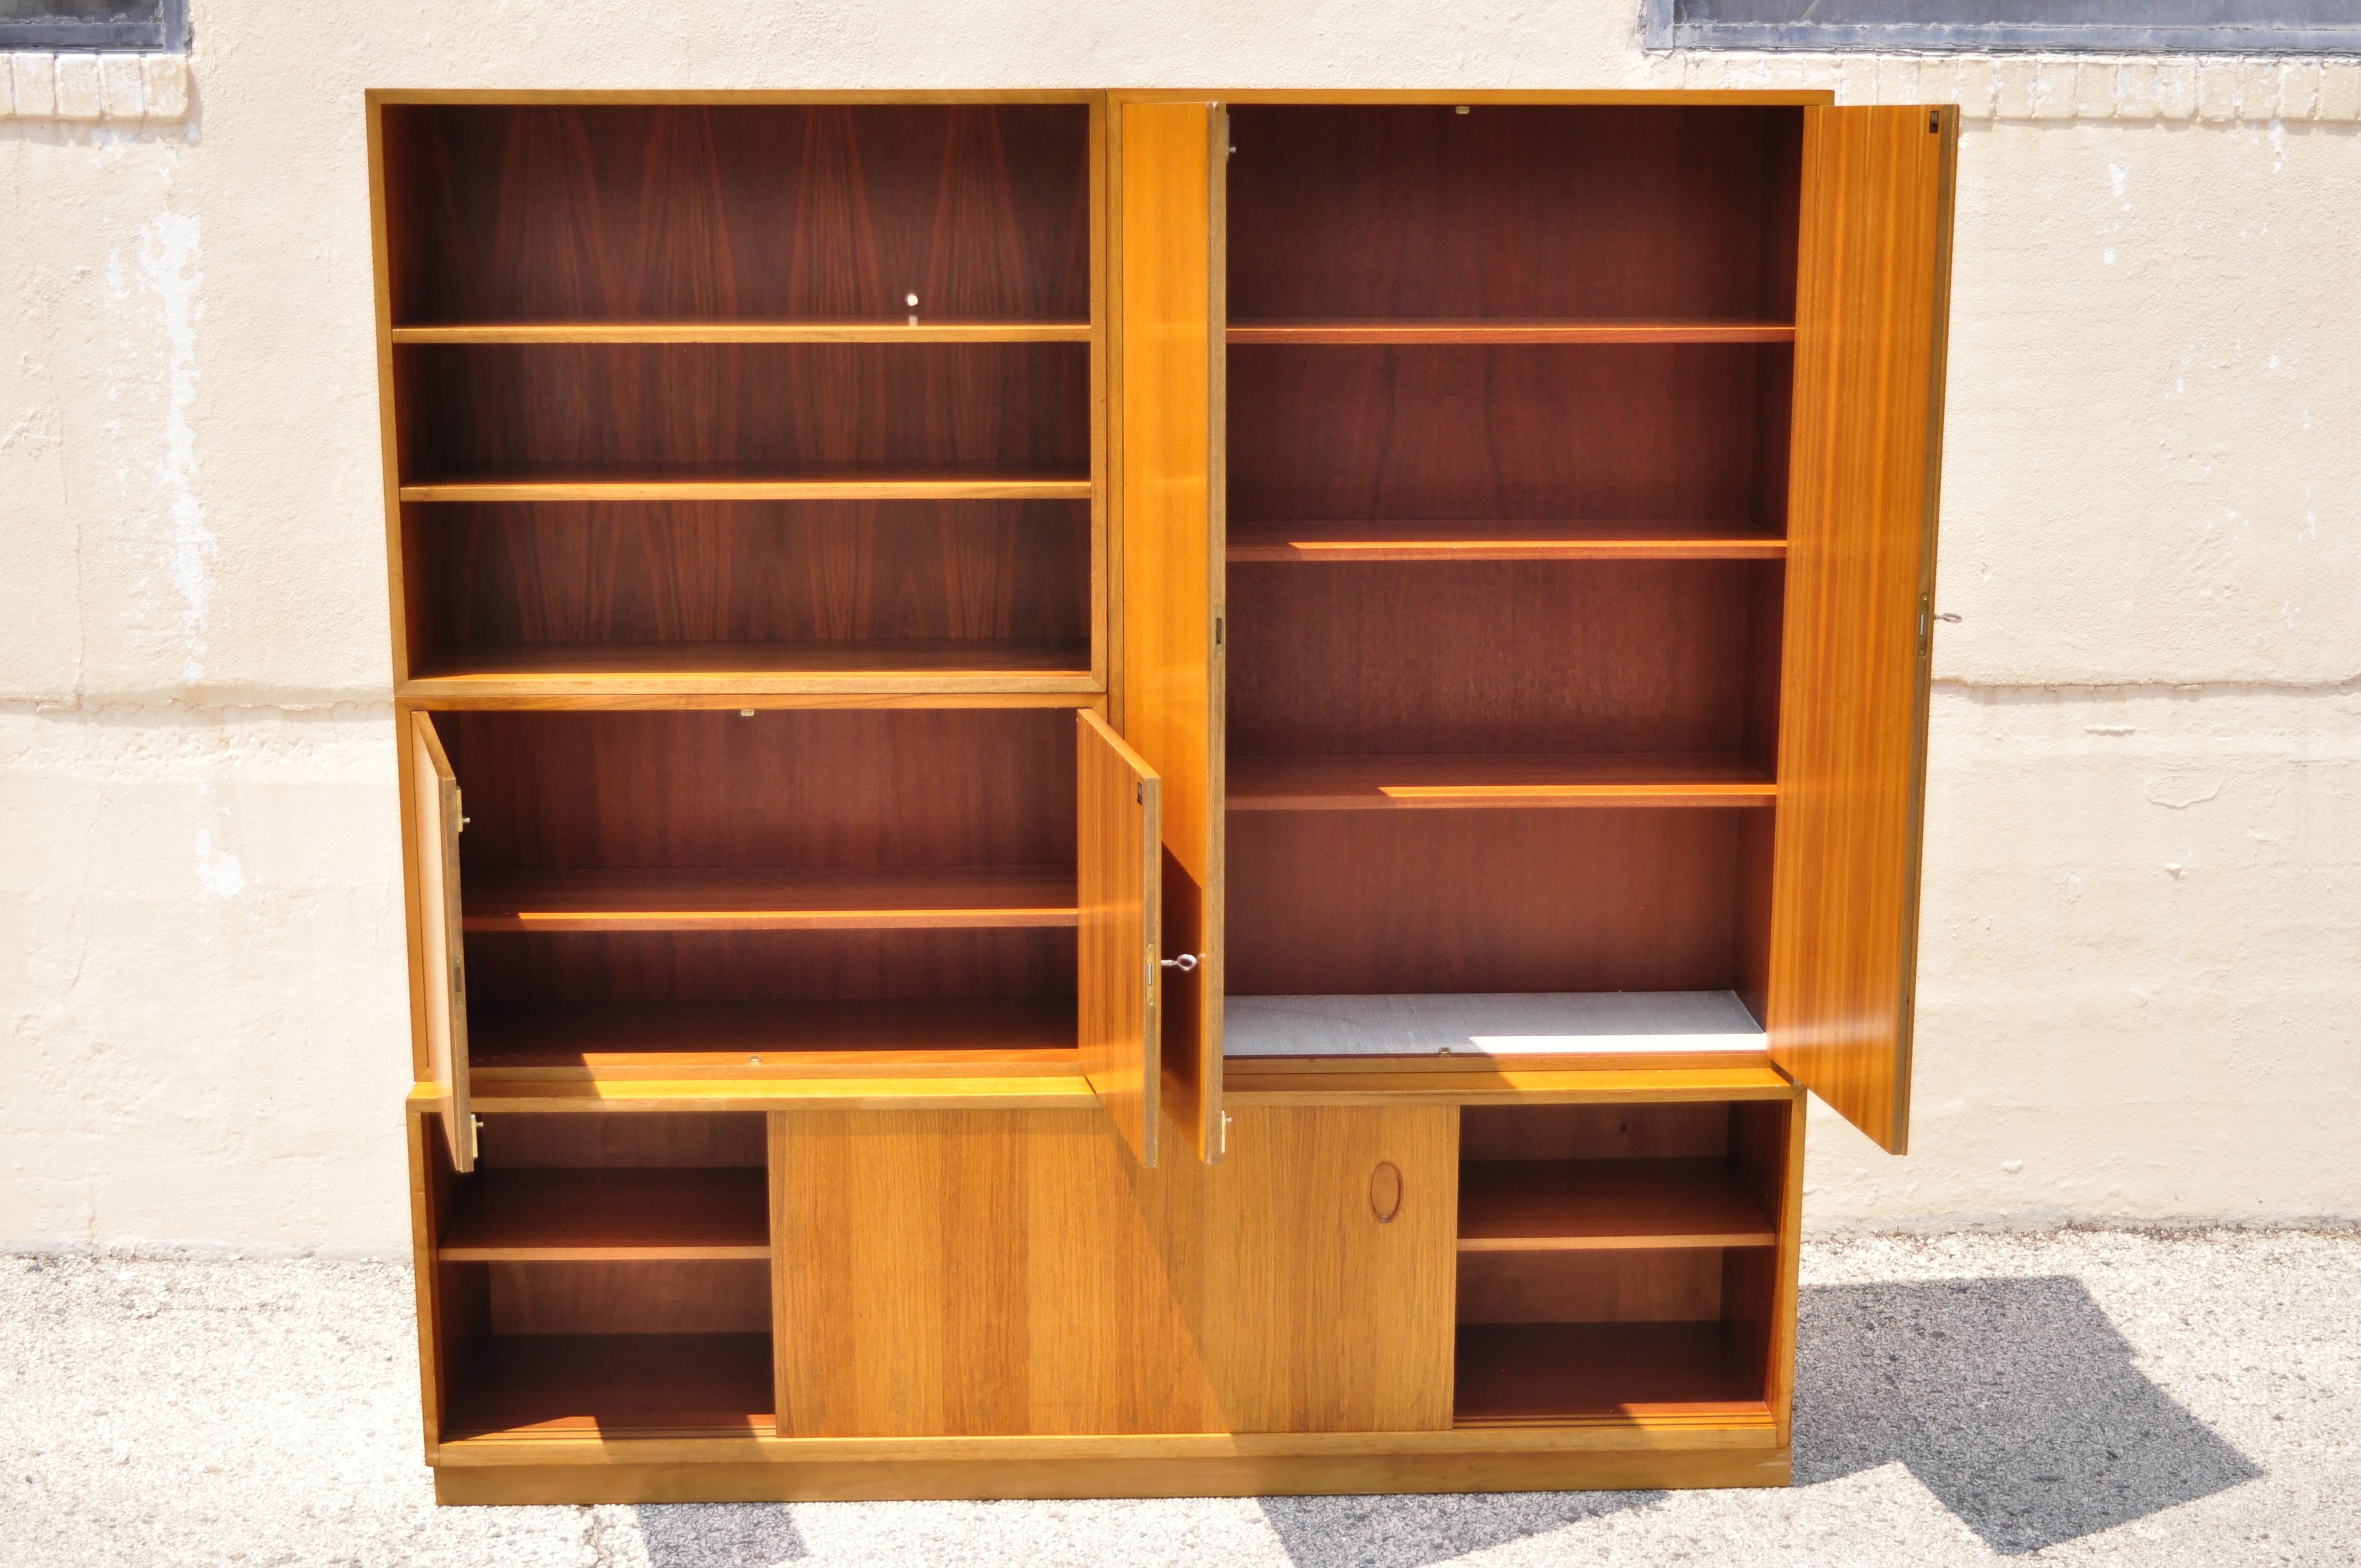 Georg Satink for WK Mobel teak modular wall unit credenza cabinet German Danish Modern. Item features beautiful wood grain, 4 part construction, original labels, working locks and keys, adjustable shelves, clean Modernist lines, great style and